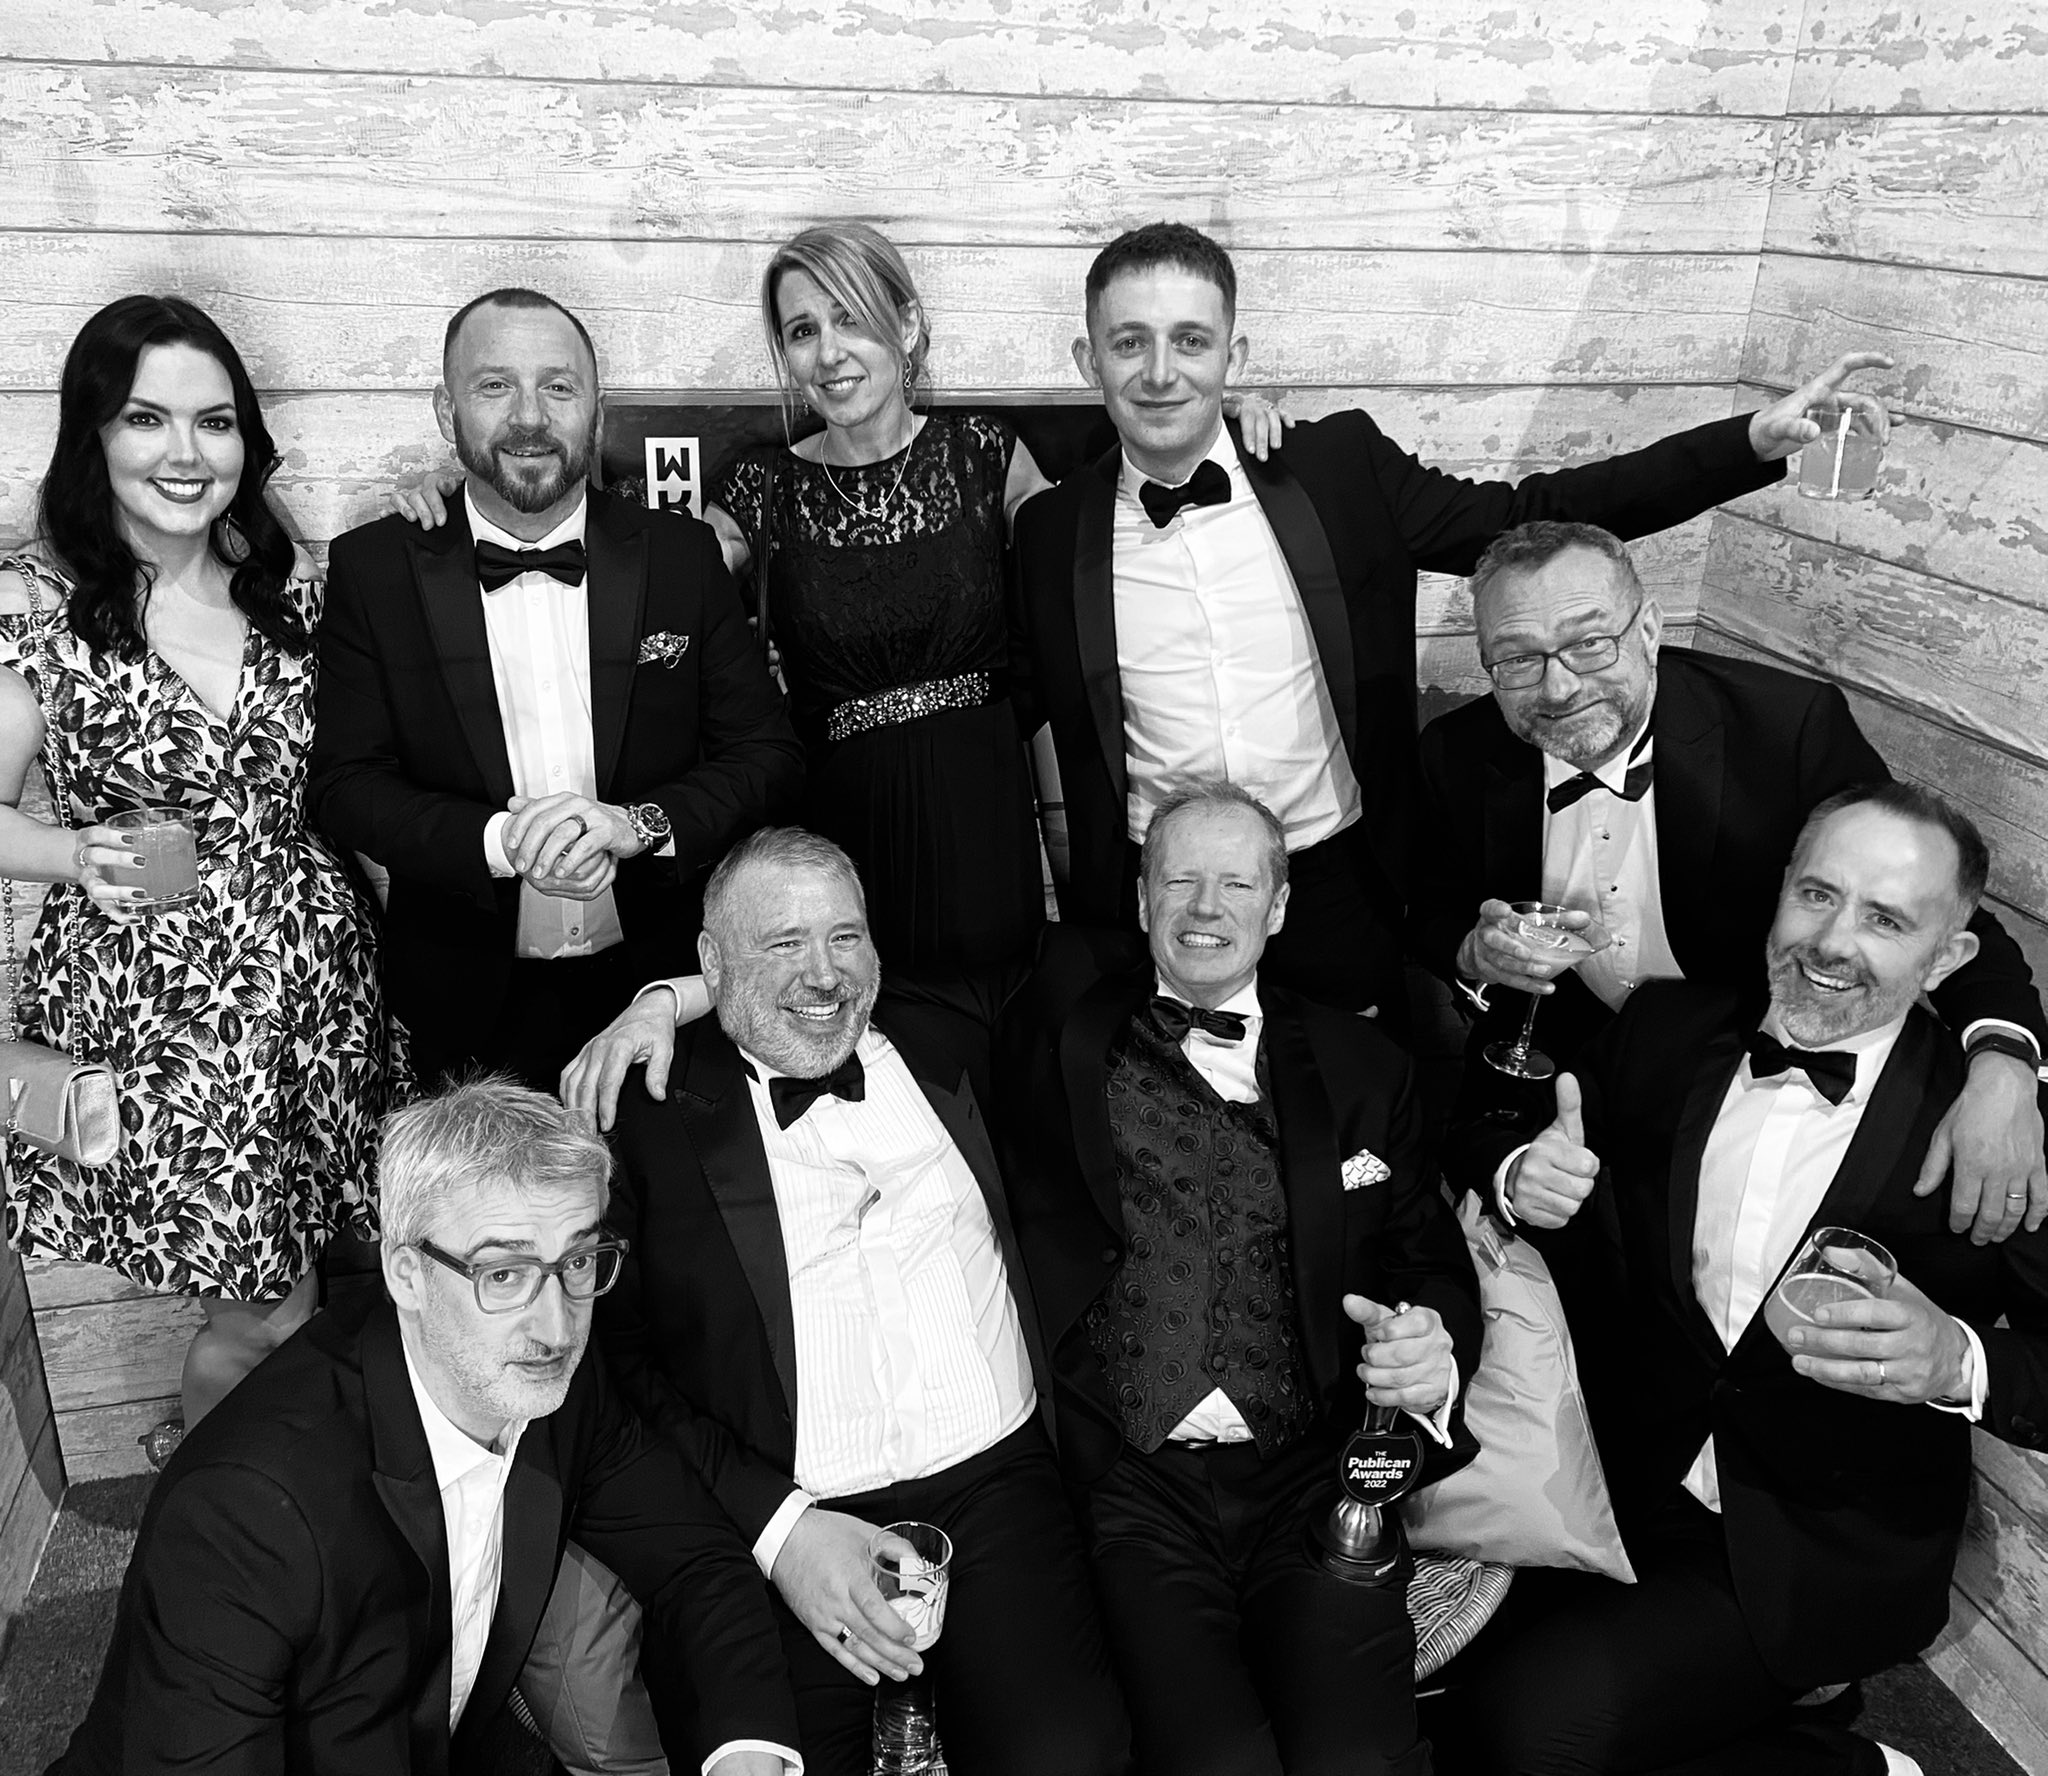 Enjoying the night with Mitchells & Butlers, the Morning Advertiser and award winners John Gyngell and Christian Townsley of North Brewing Co. and Peter Marks of REKOM